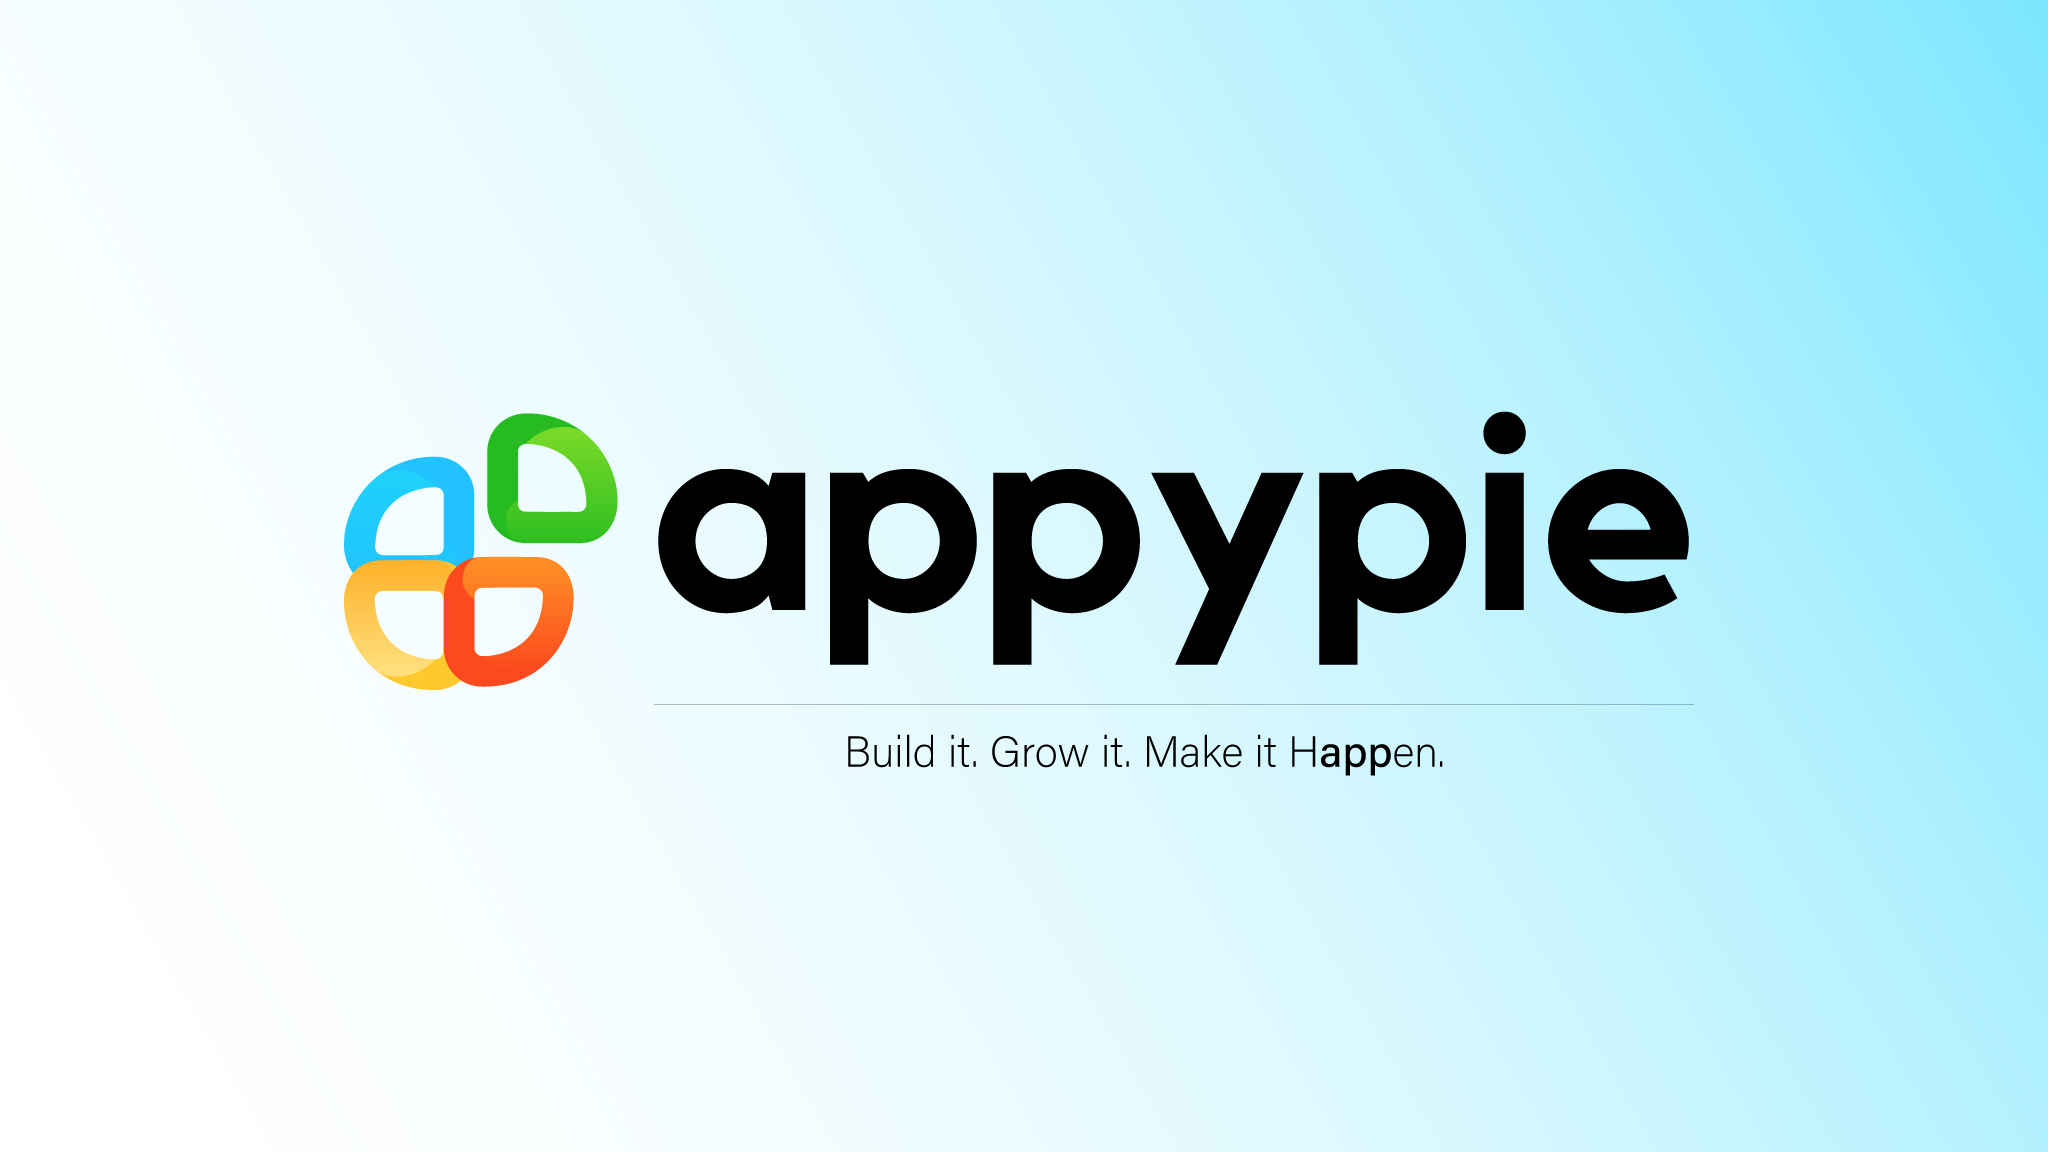 Say hello to Appy Pies new logo!